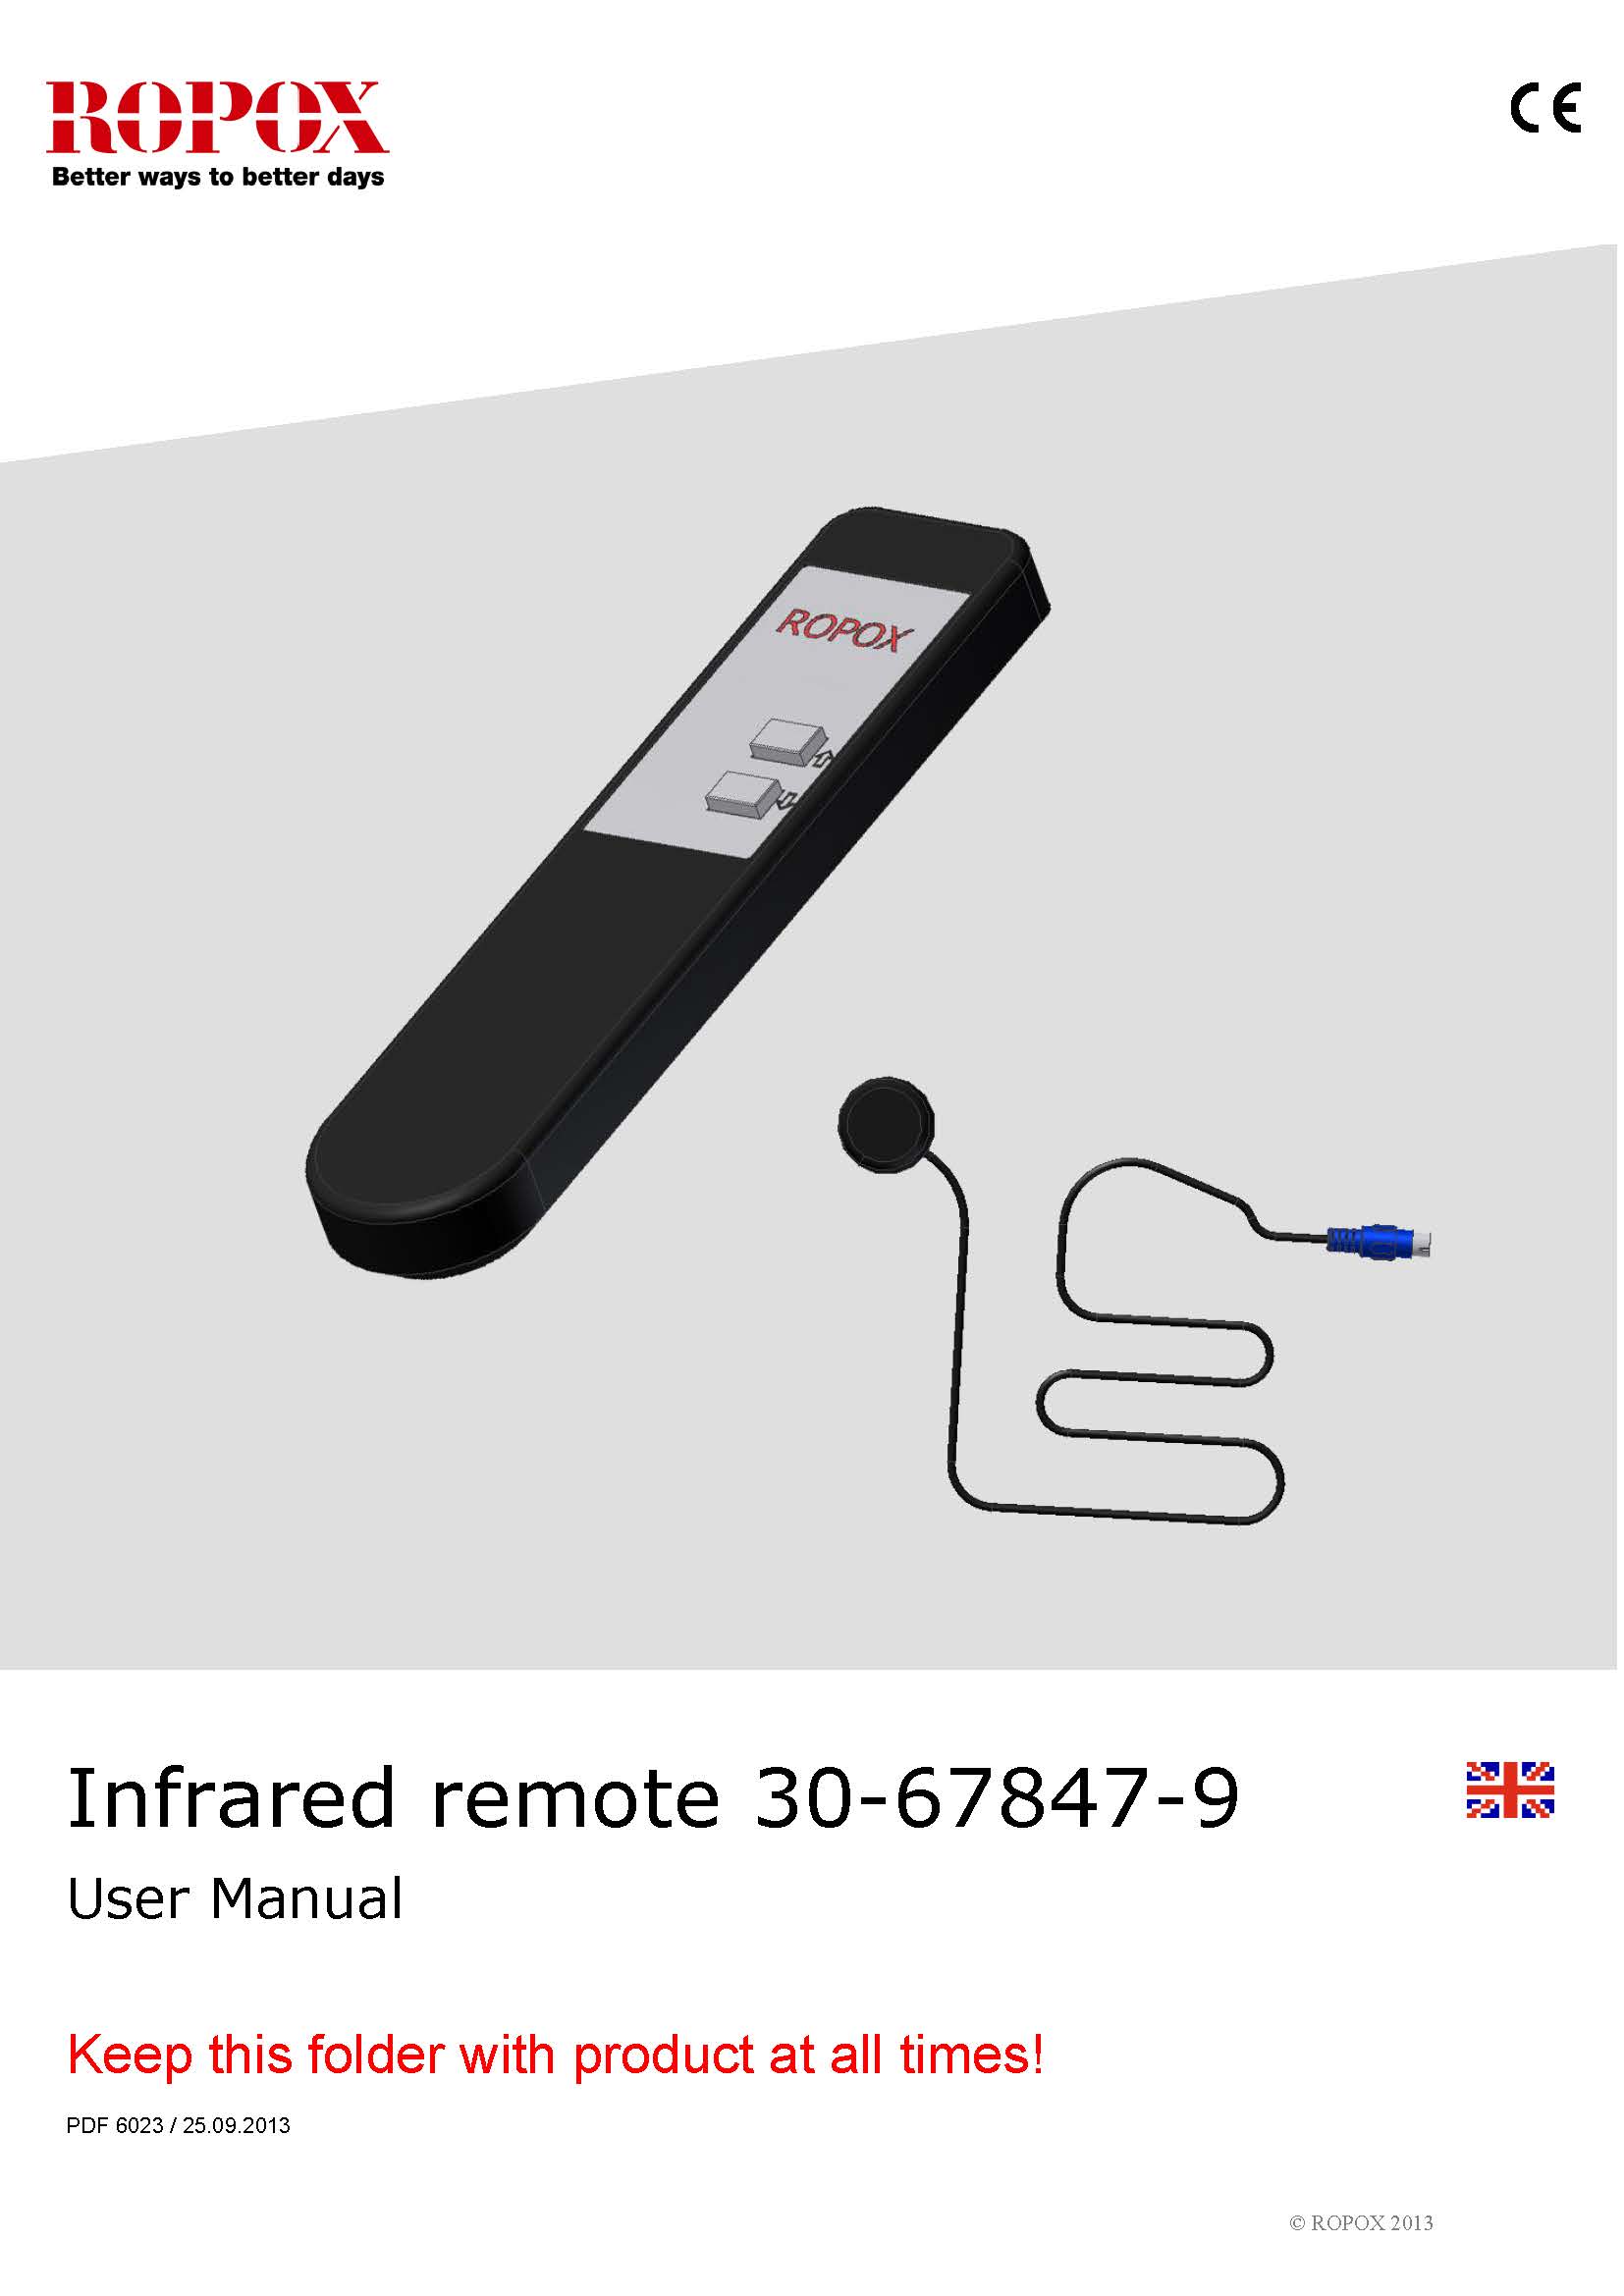 Ropox user manual - Infrared remote 1 channel